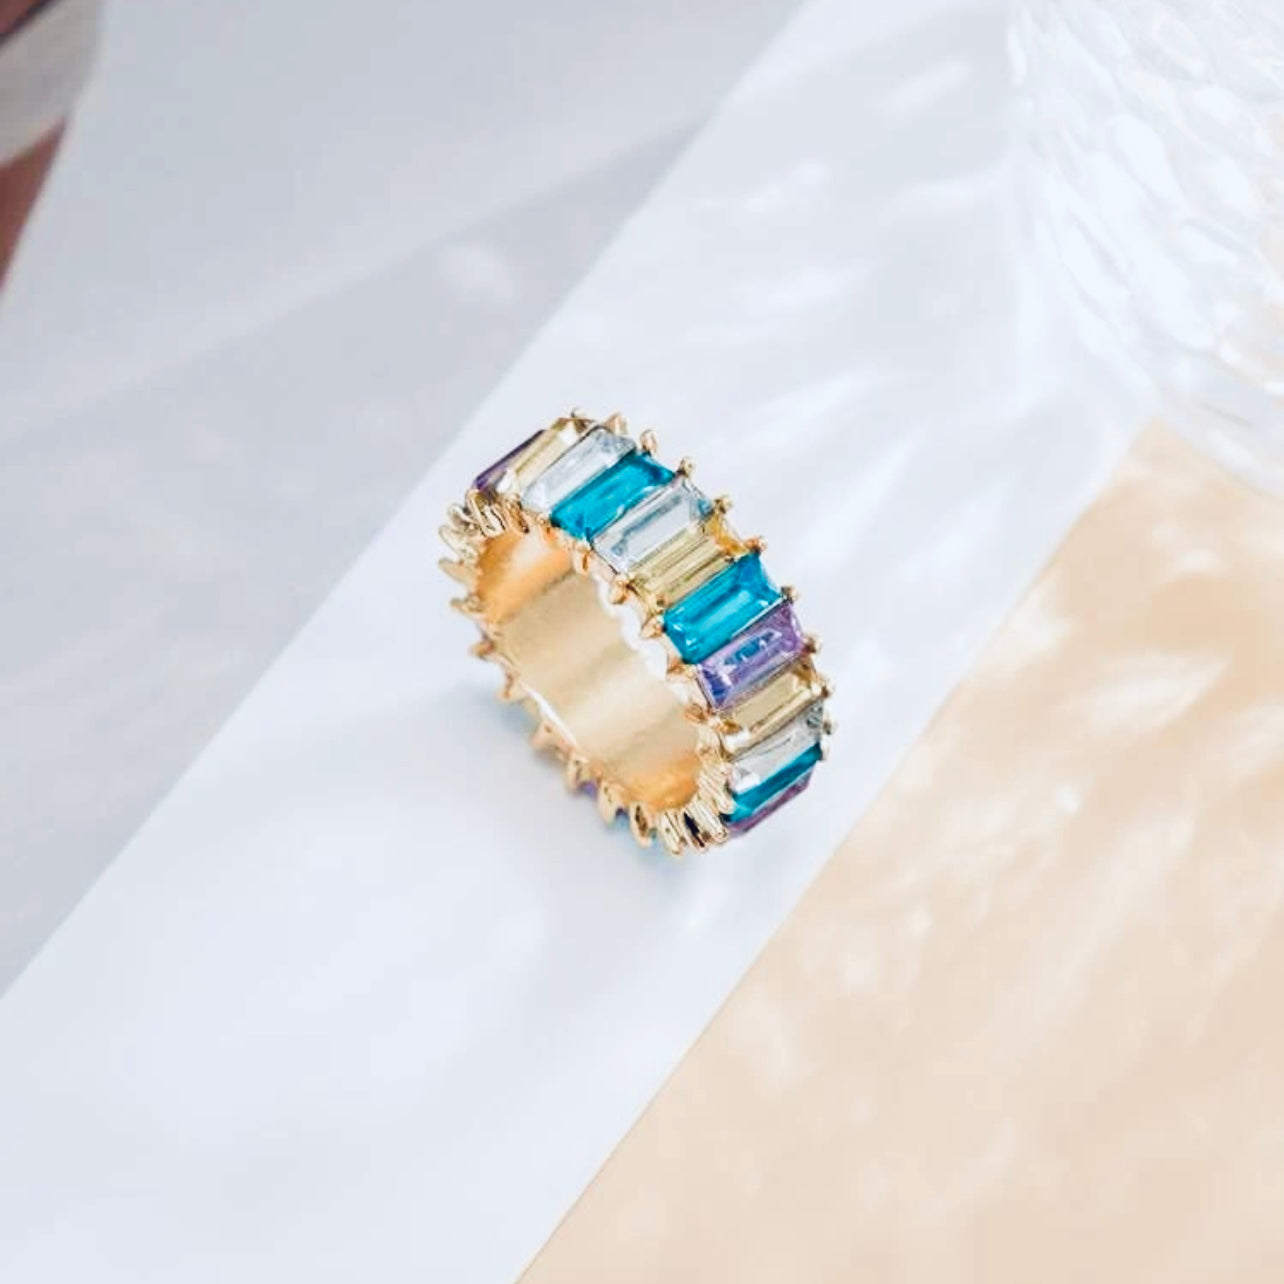 Exquisite Multi-Colored Cubic Zirconia & Crystal Eternity, Baguette Ring, Perfect Gift For Her, For Mom